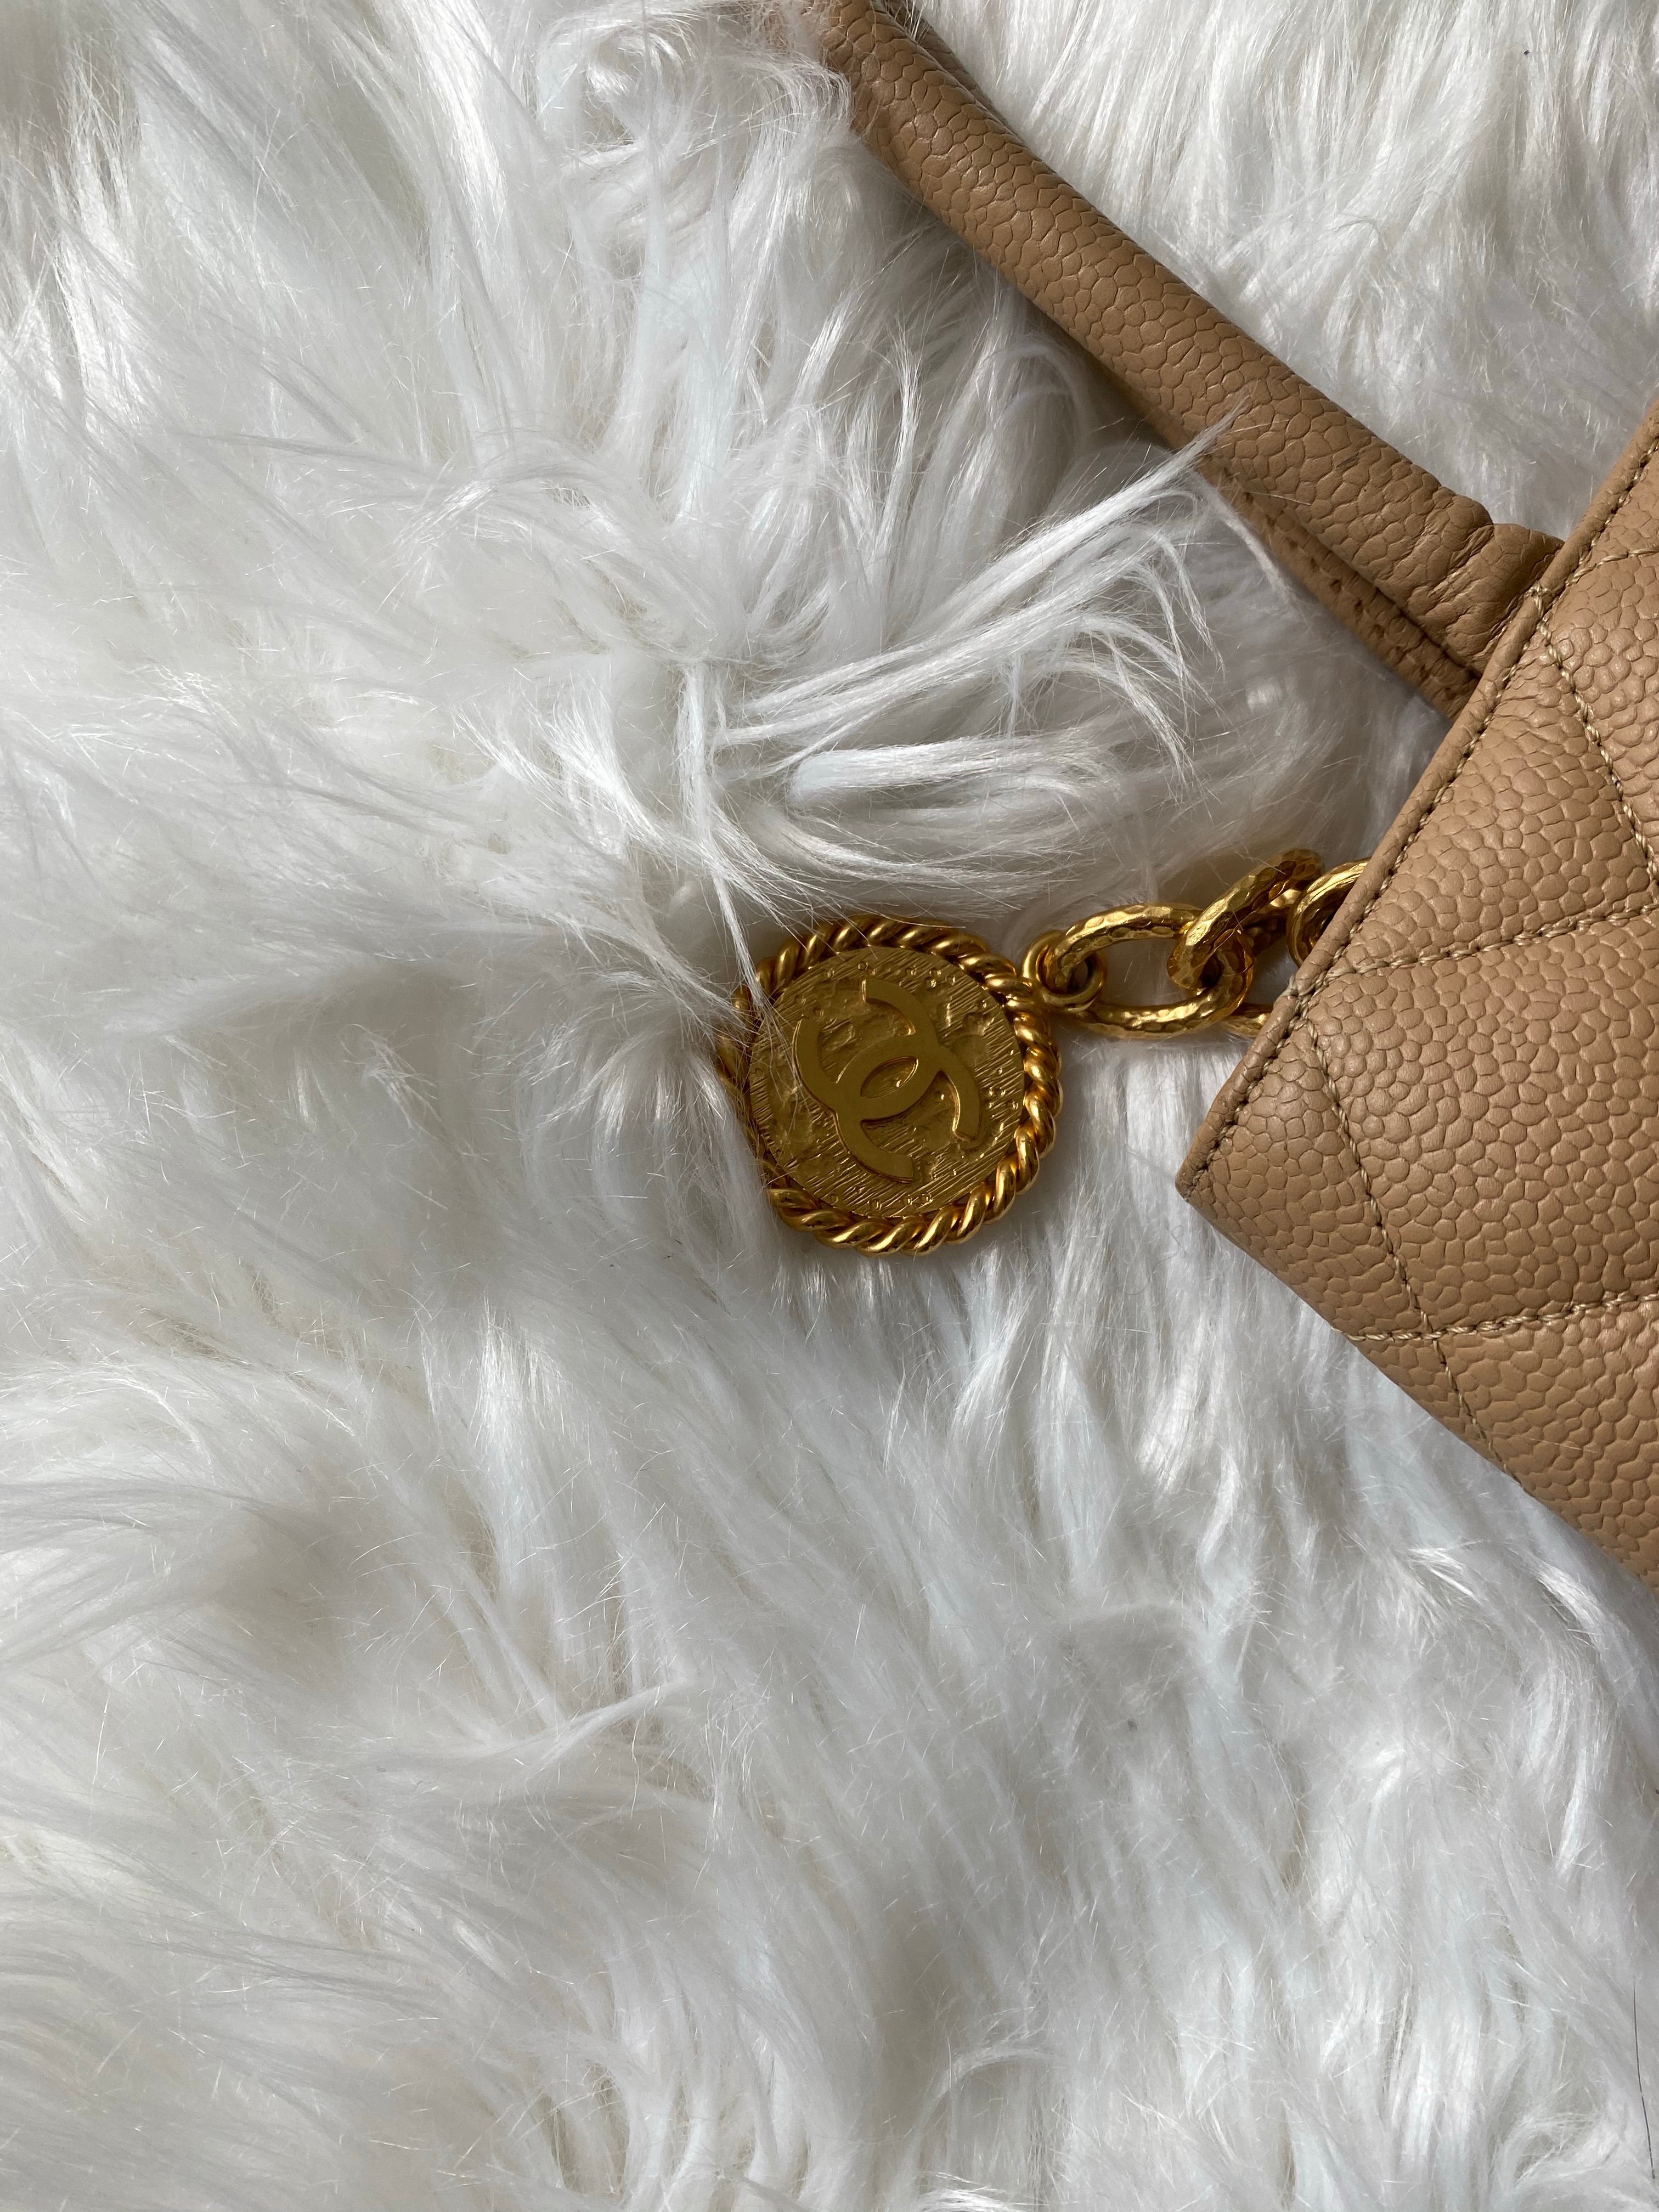 Chanel medallion tote – Beccas Bags